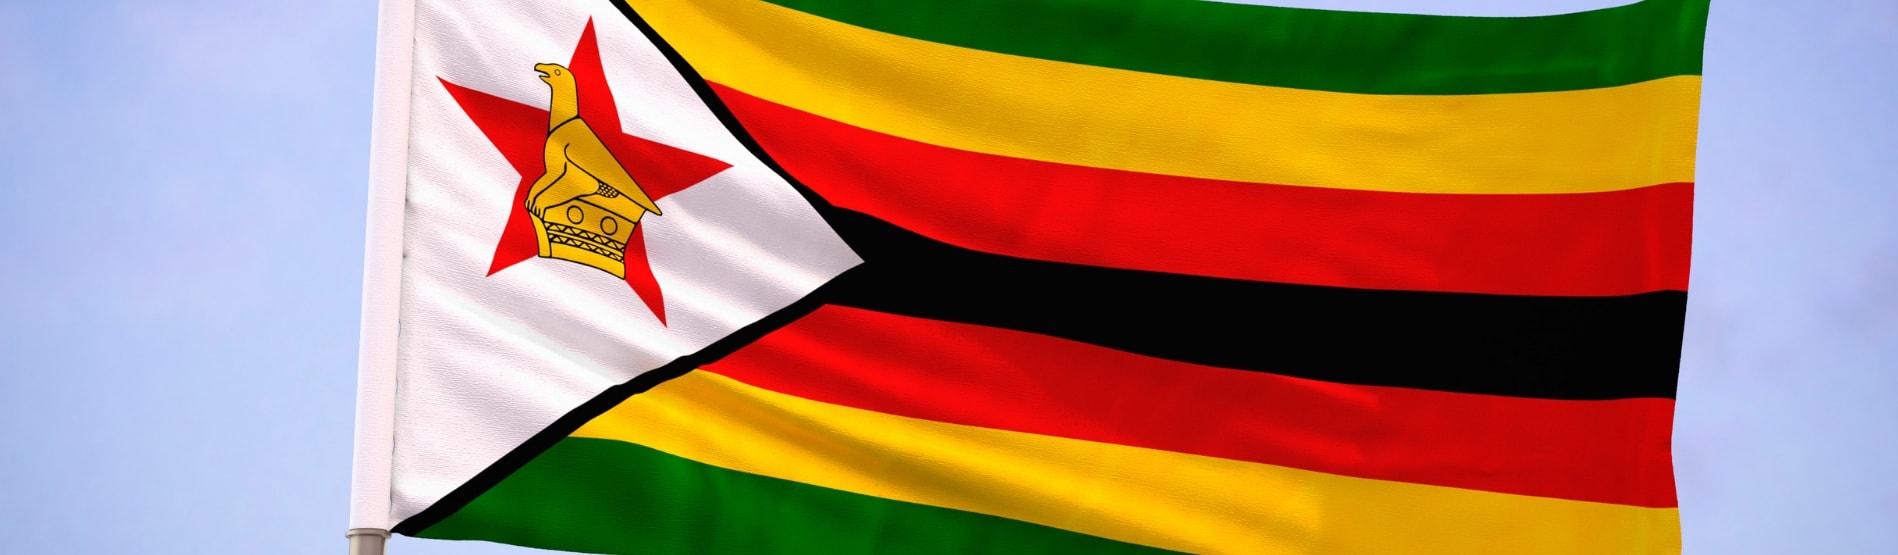 Zimbabwe flag blowing in the breeze.